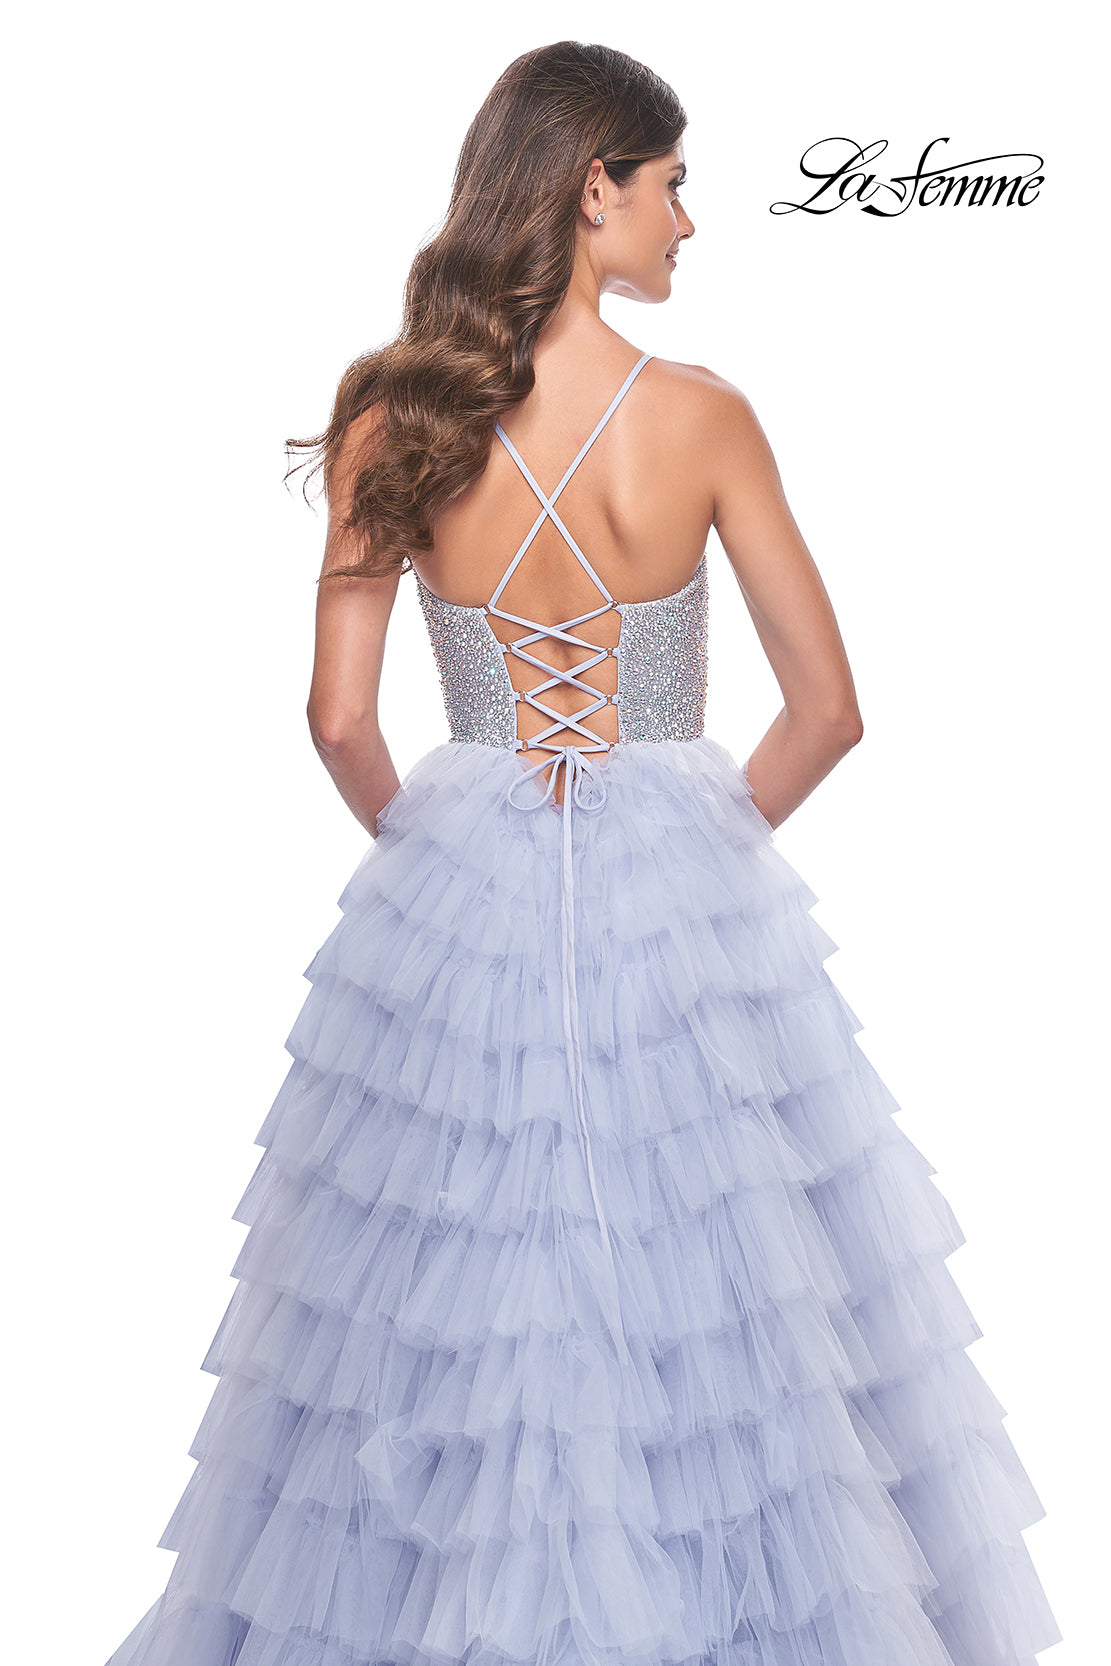 La-Femme-32335-Sweetheart-Neckline-Lace-up-Back-High-Slit-Hot-Stone-Tulle-Ball-Gowns-Light-Periwinkle-Evening-Dress-B-Chic-Fashions-Prom-Dress